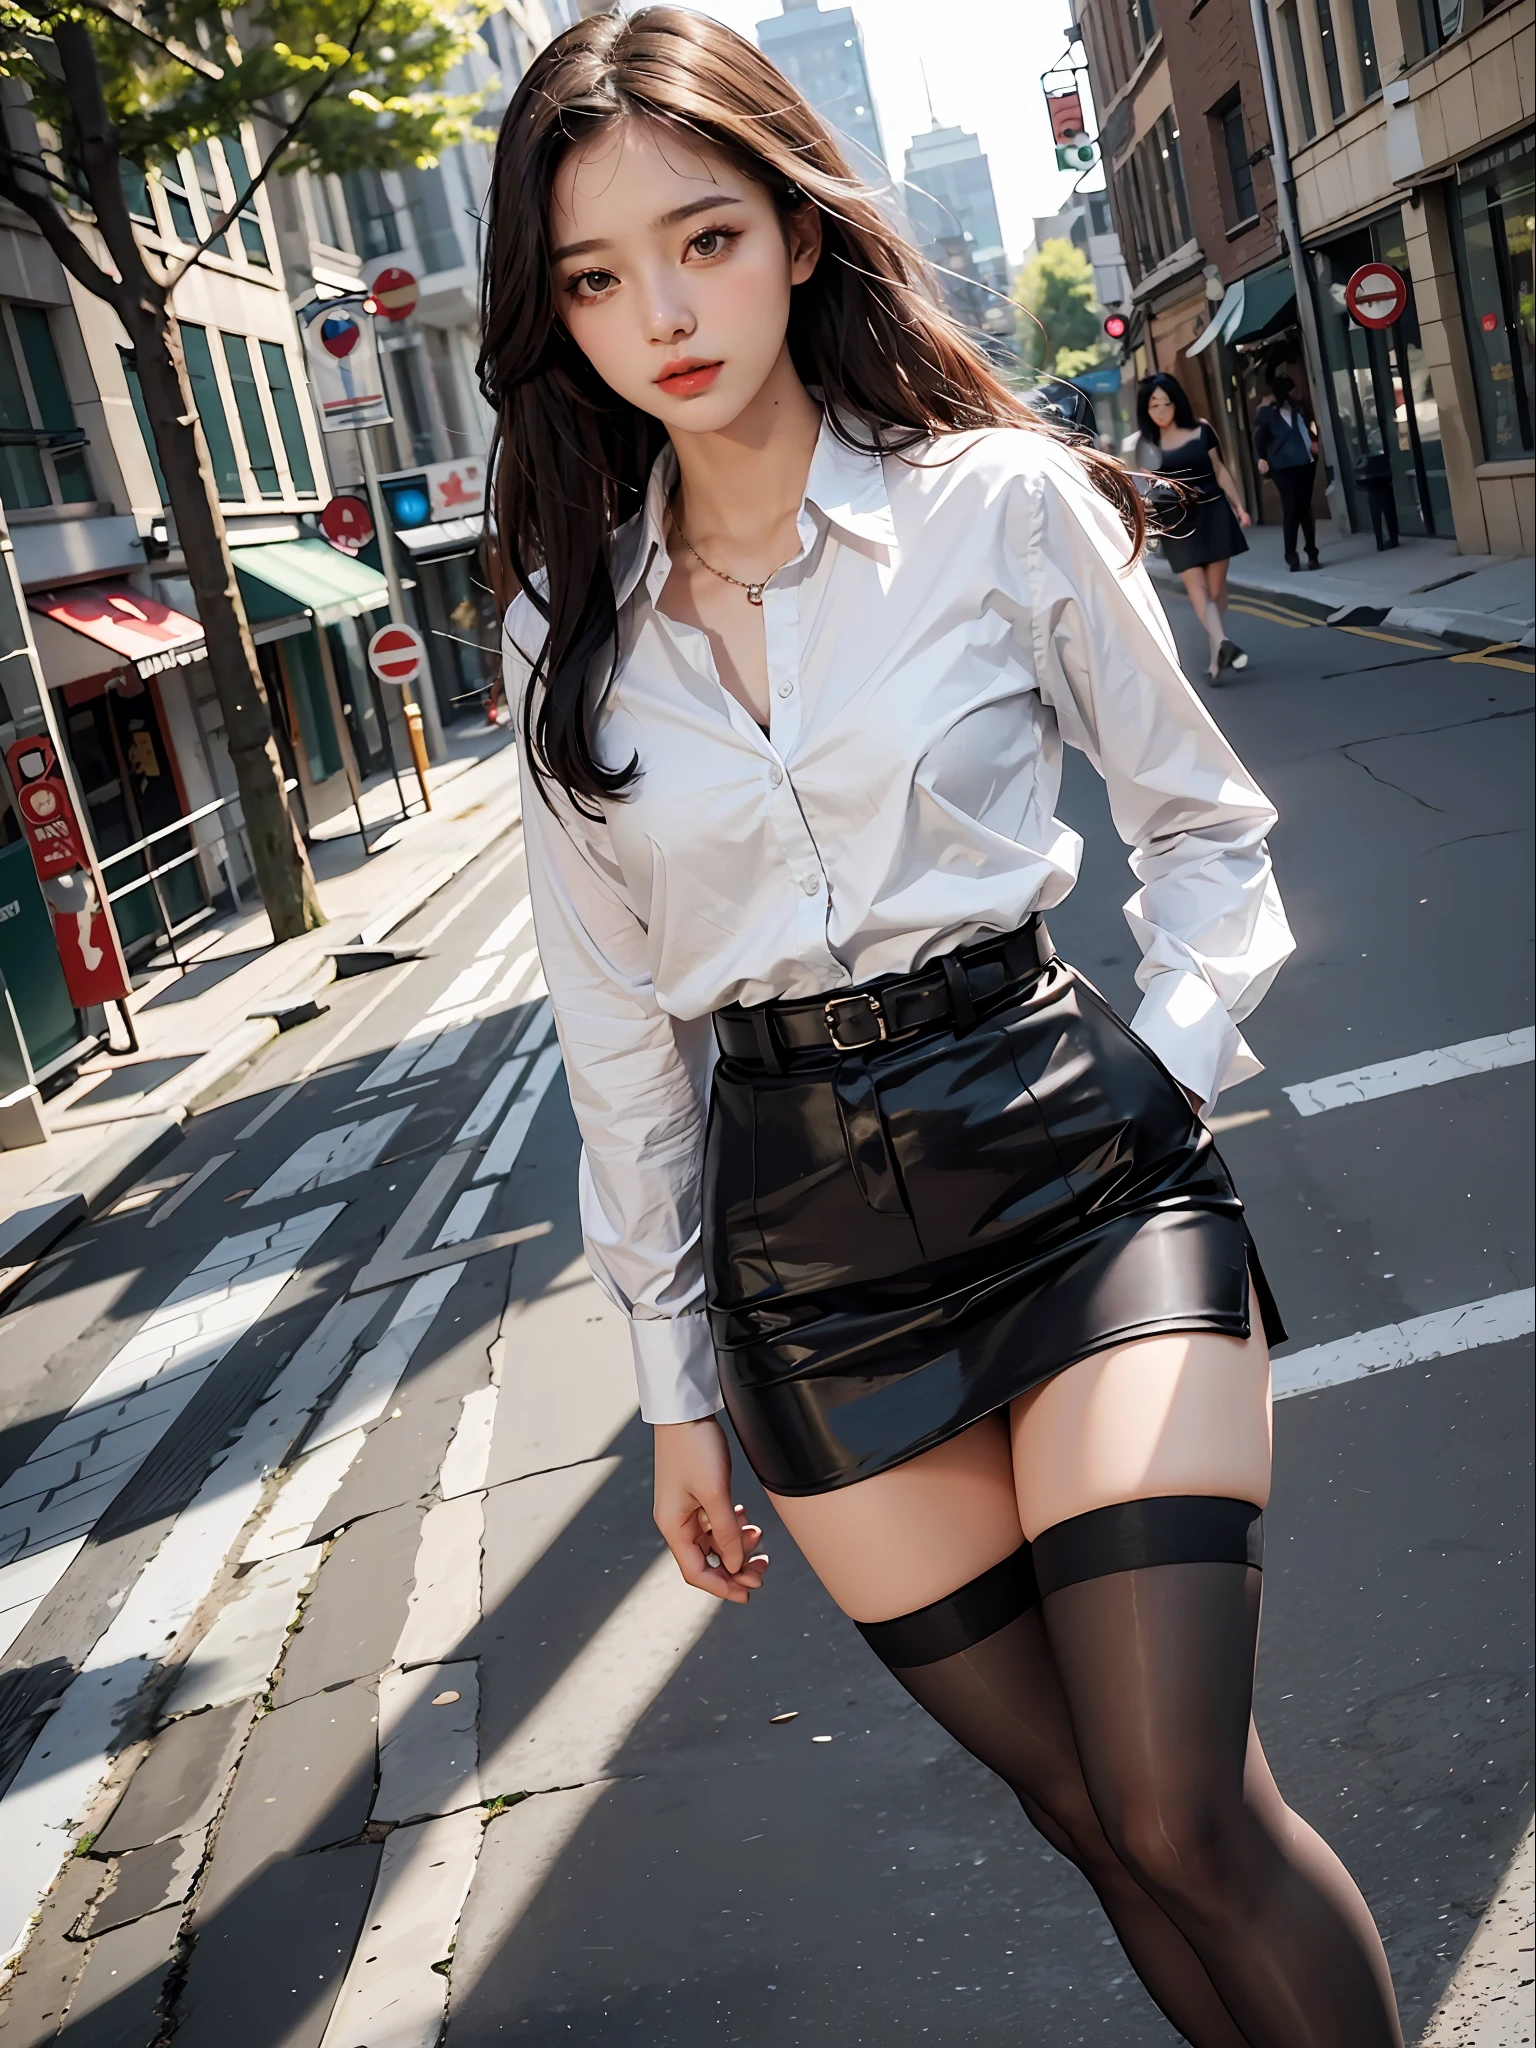 8k, Best Quality, (Beauty), High Definition, Realistic, Real Person, Full Body Portrait, Delicate Face, Cute Face, 25 Year Old Woman, Slim Figure, Small Bust, Office Uniform, Office Clothes, Black Stockings, Outdoor Scene, Sedentary